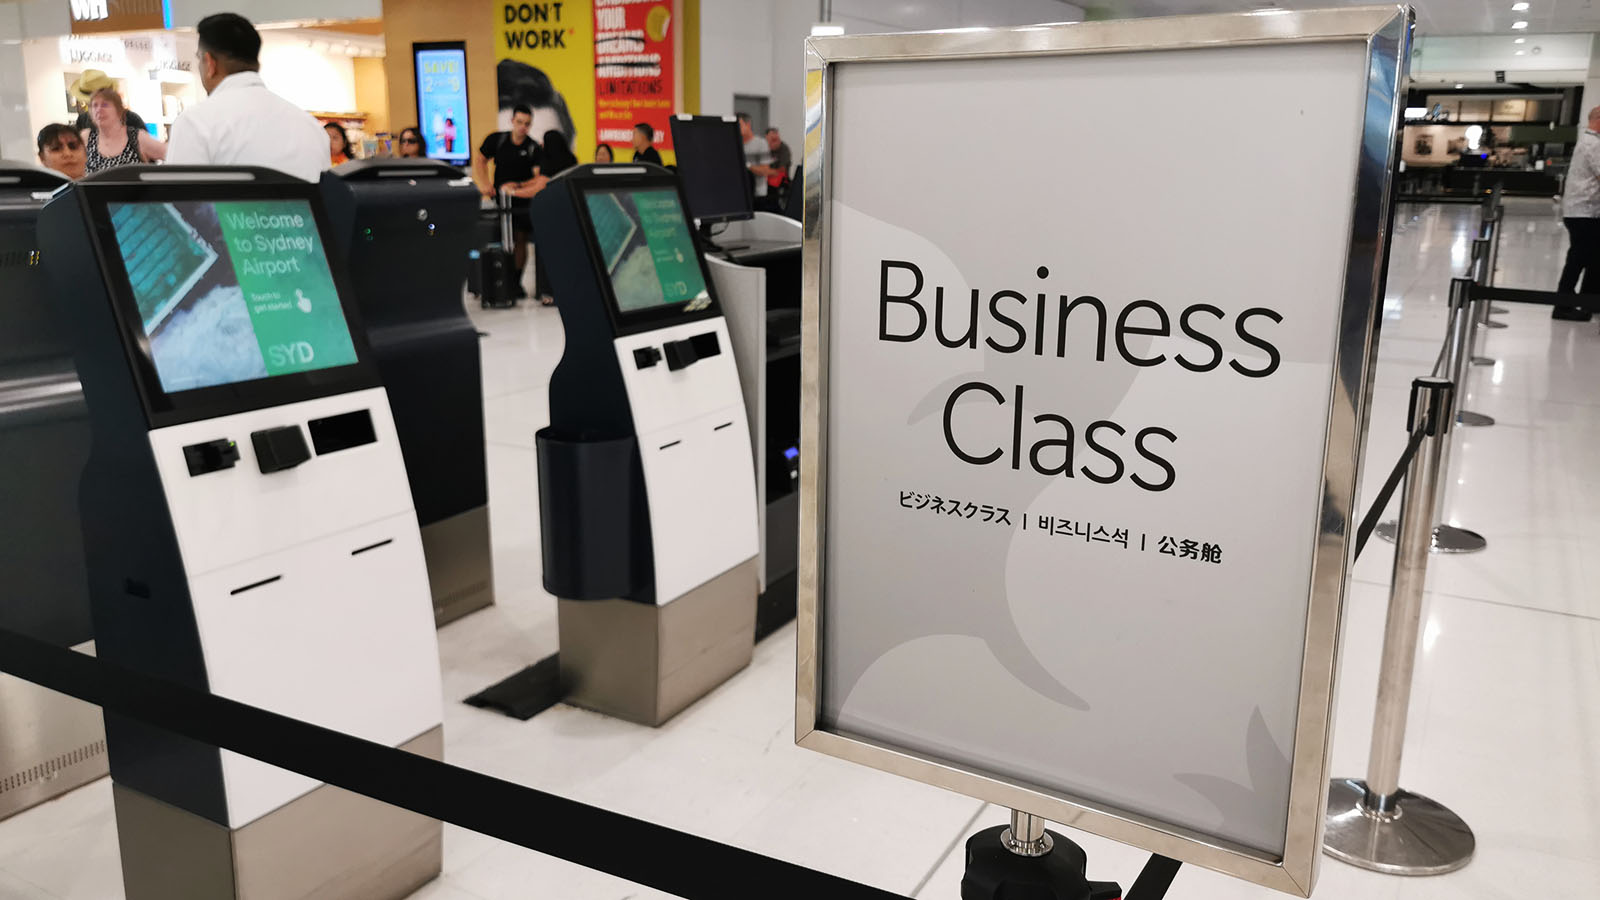 Business Class check-in sign at Sydney Airport for a Hawaiian Airlines Airbus A330 Business Class flight